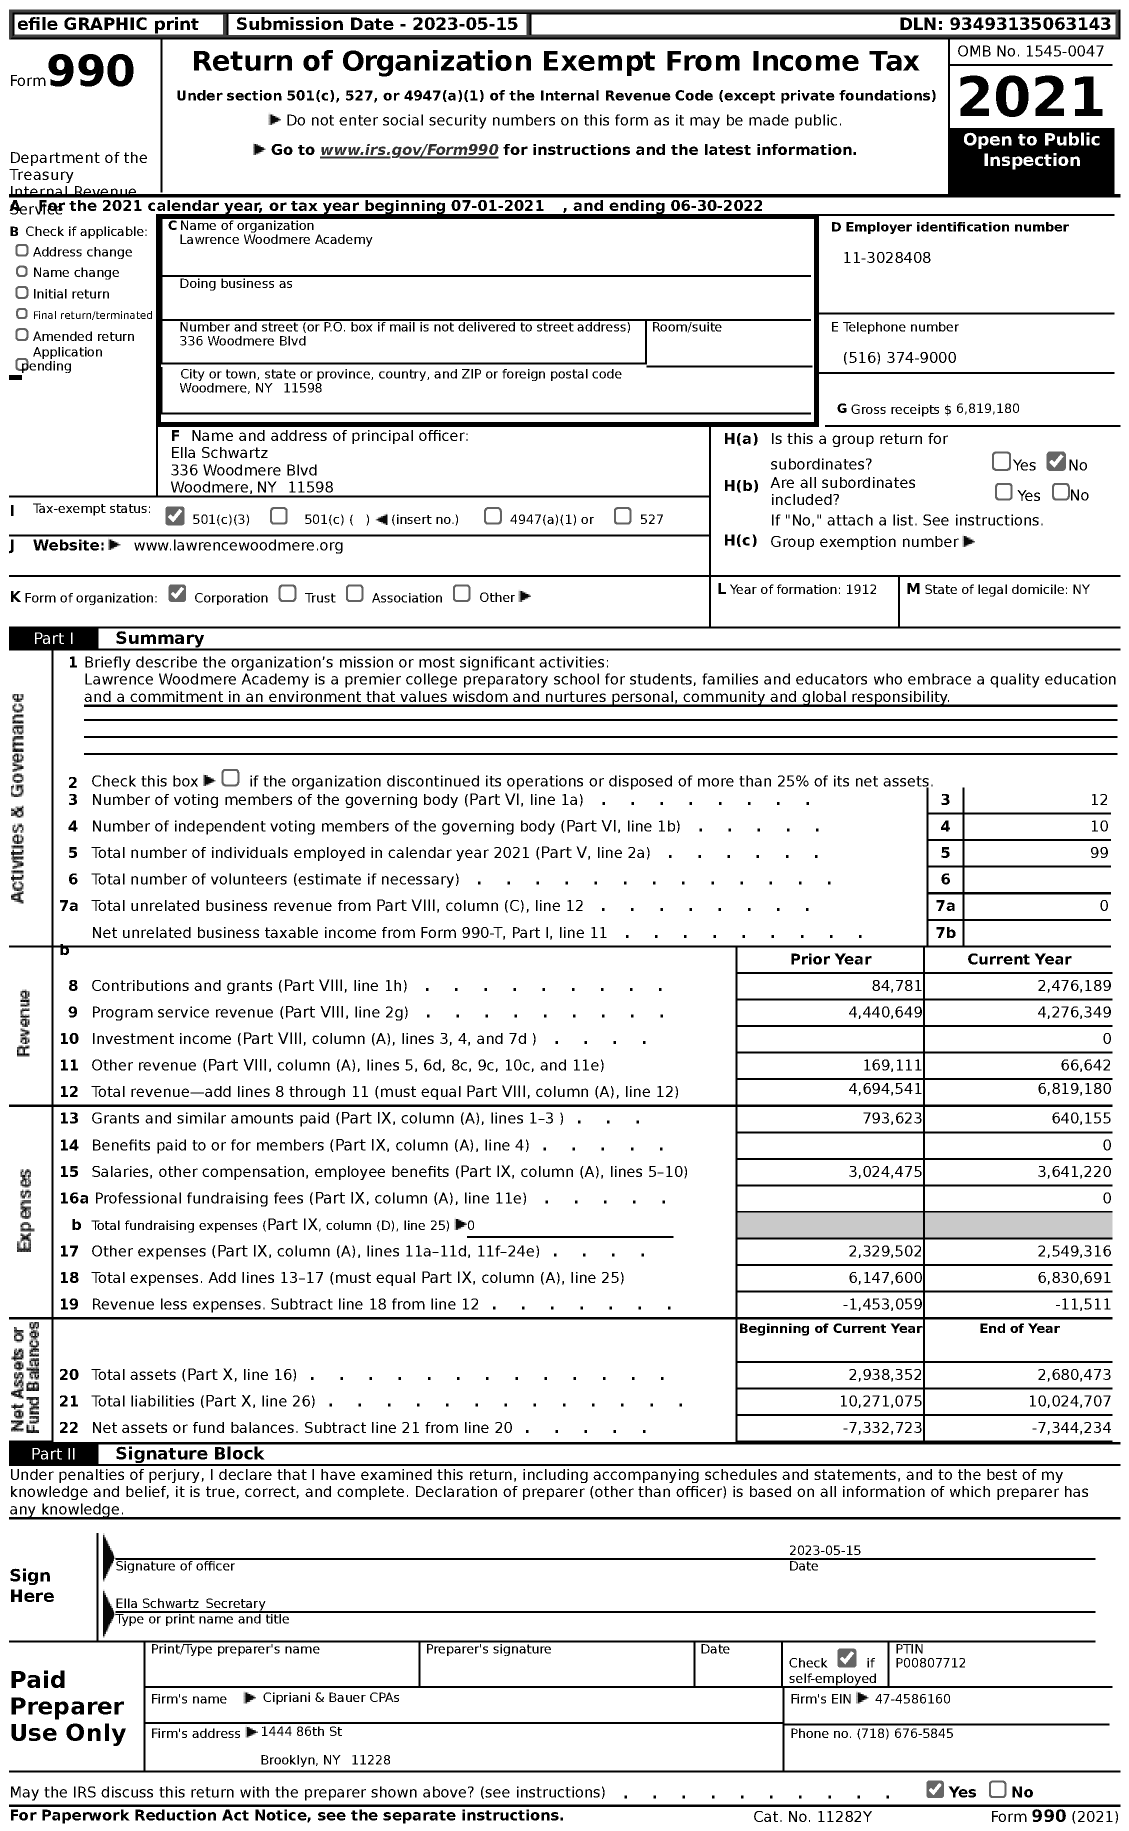 Image of first page of 2021 Form 990 for Lawrence Woodmere Academy (LWA)